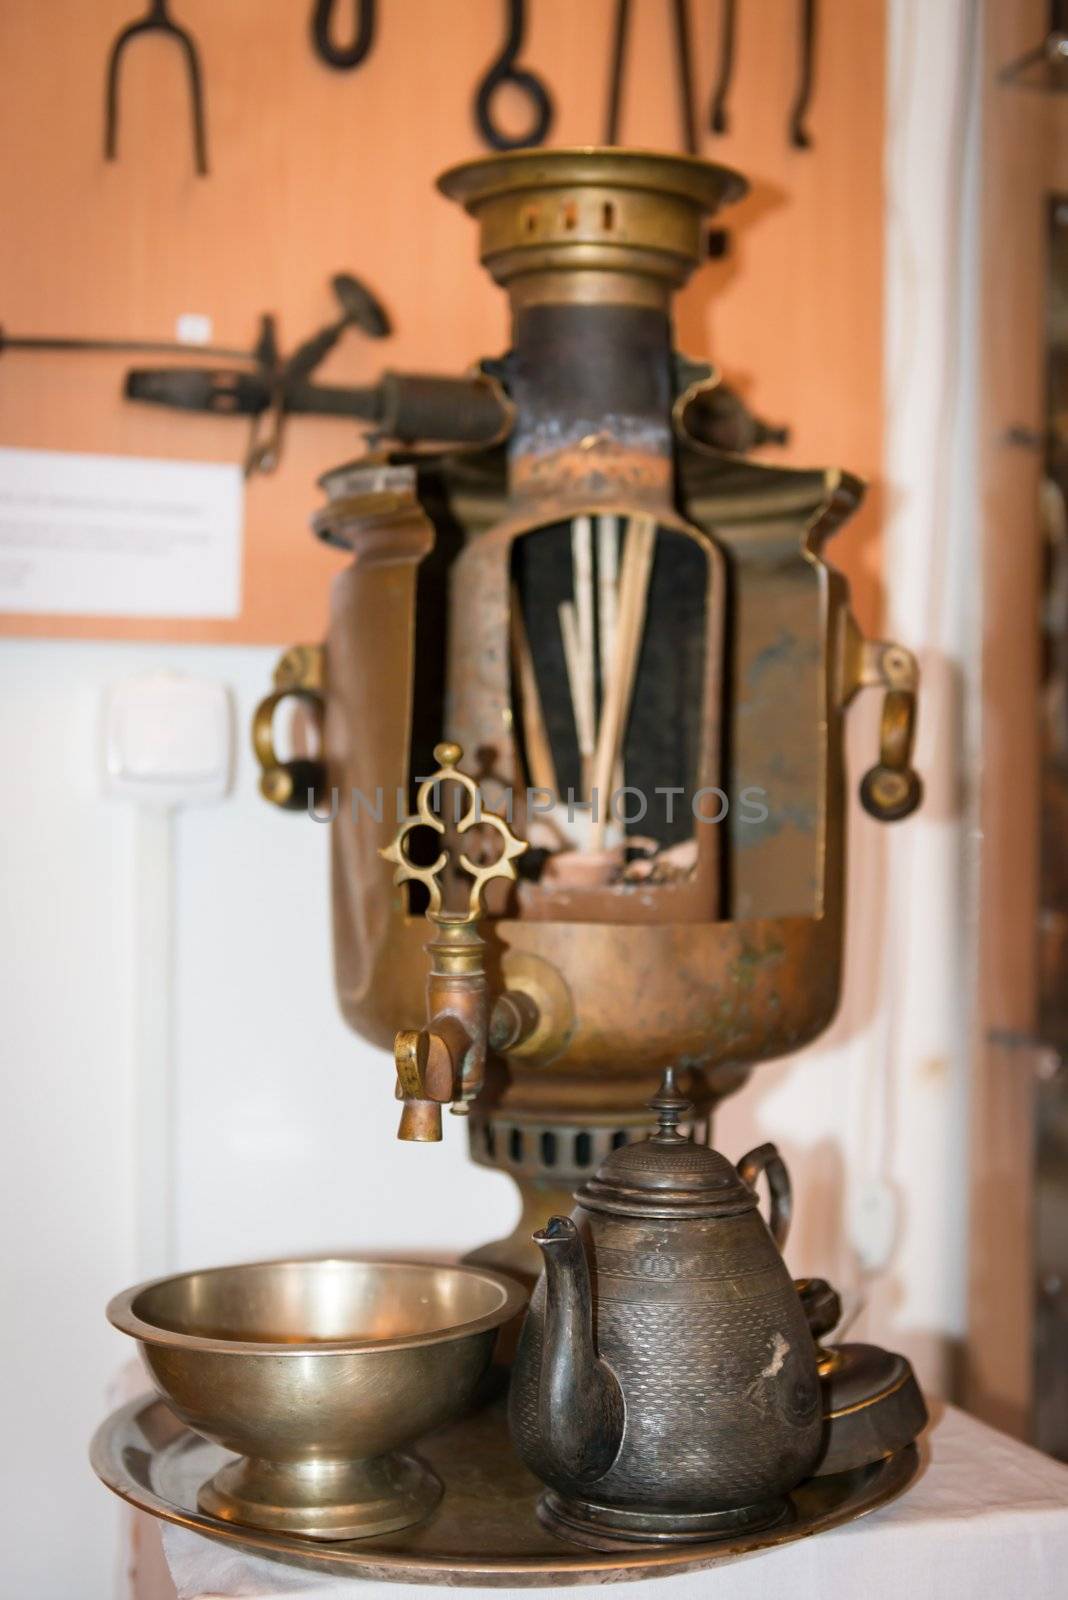 Traditional samovar with internal contents and teapot, selective focus on the front spout